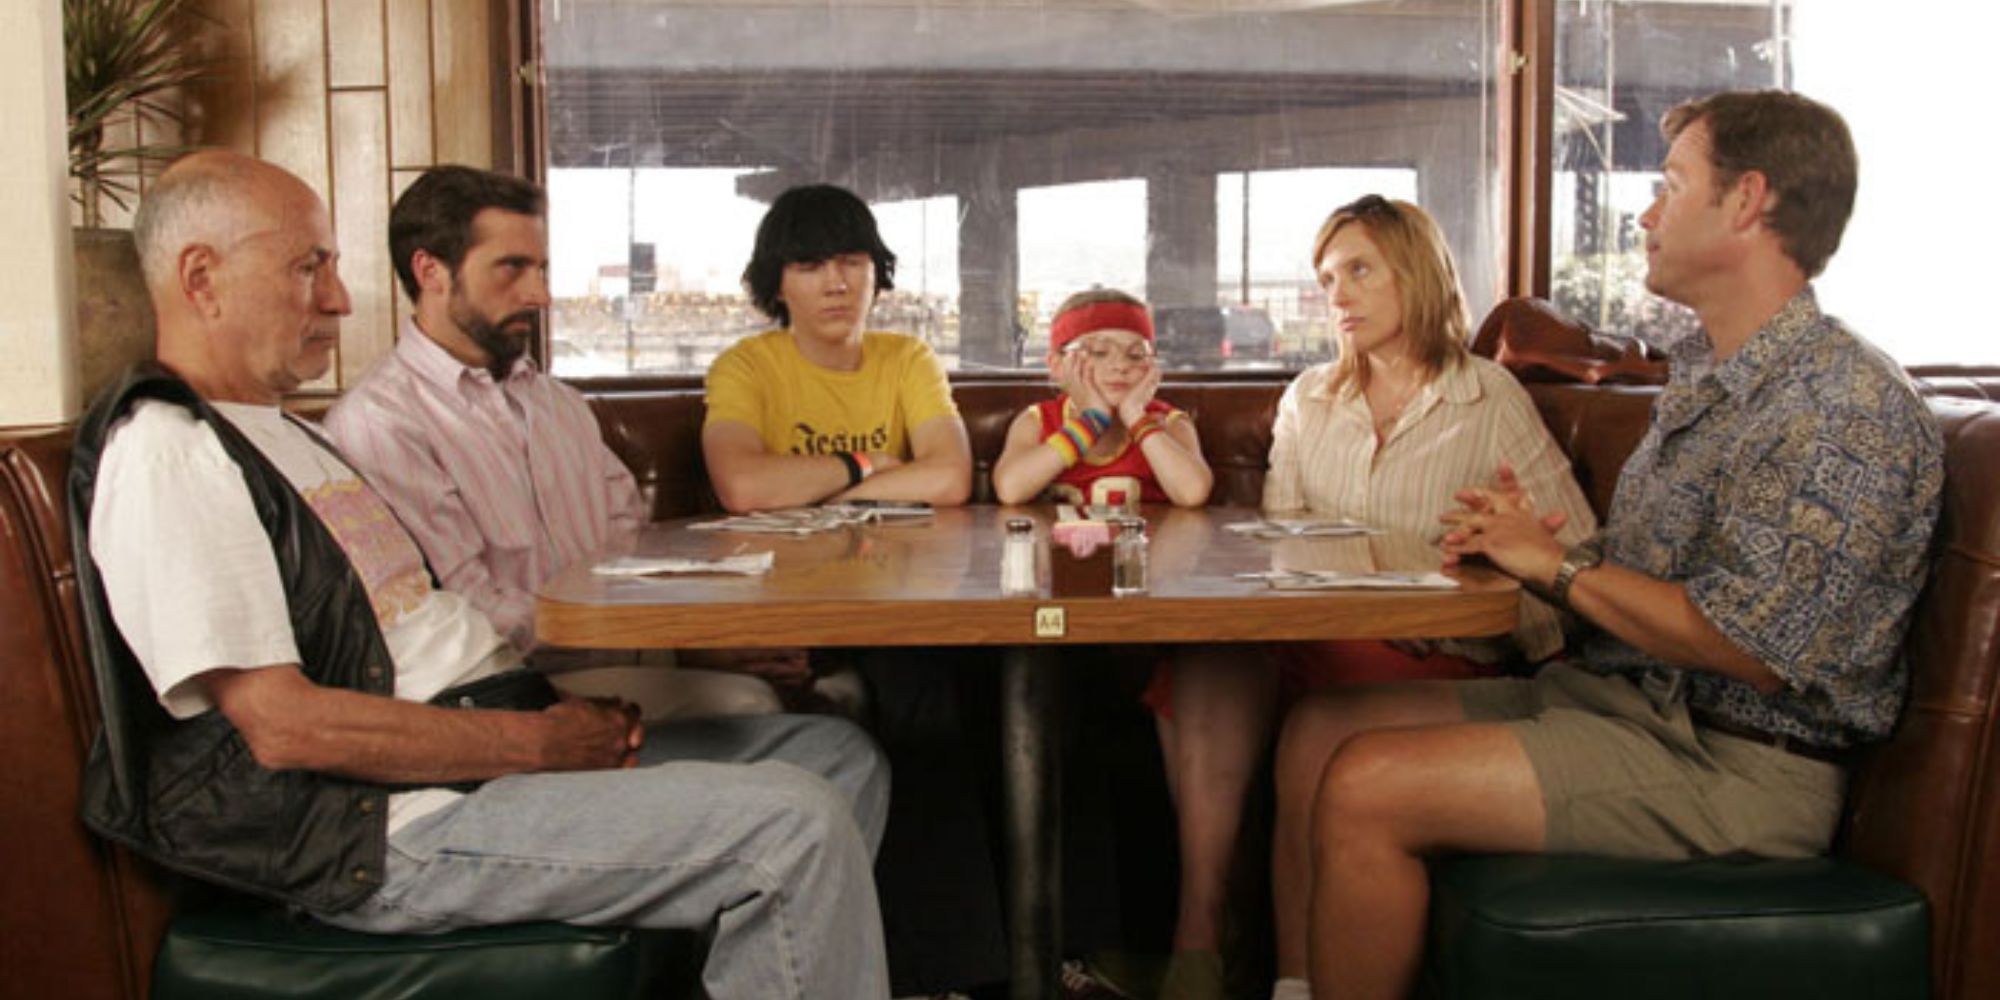 The Hoover family from Little Miss Sunshine sitting in a diner